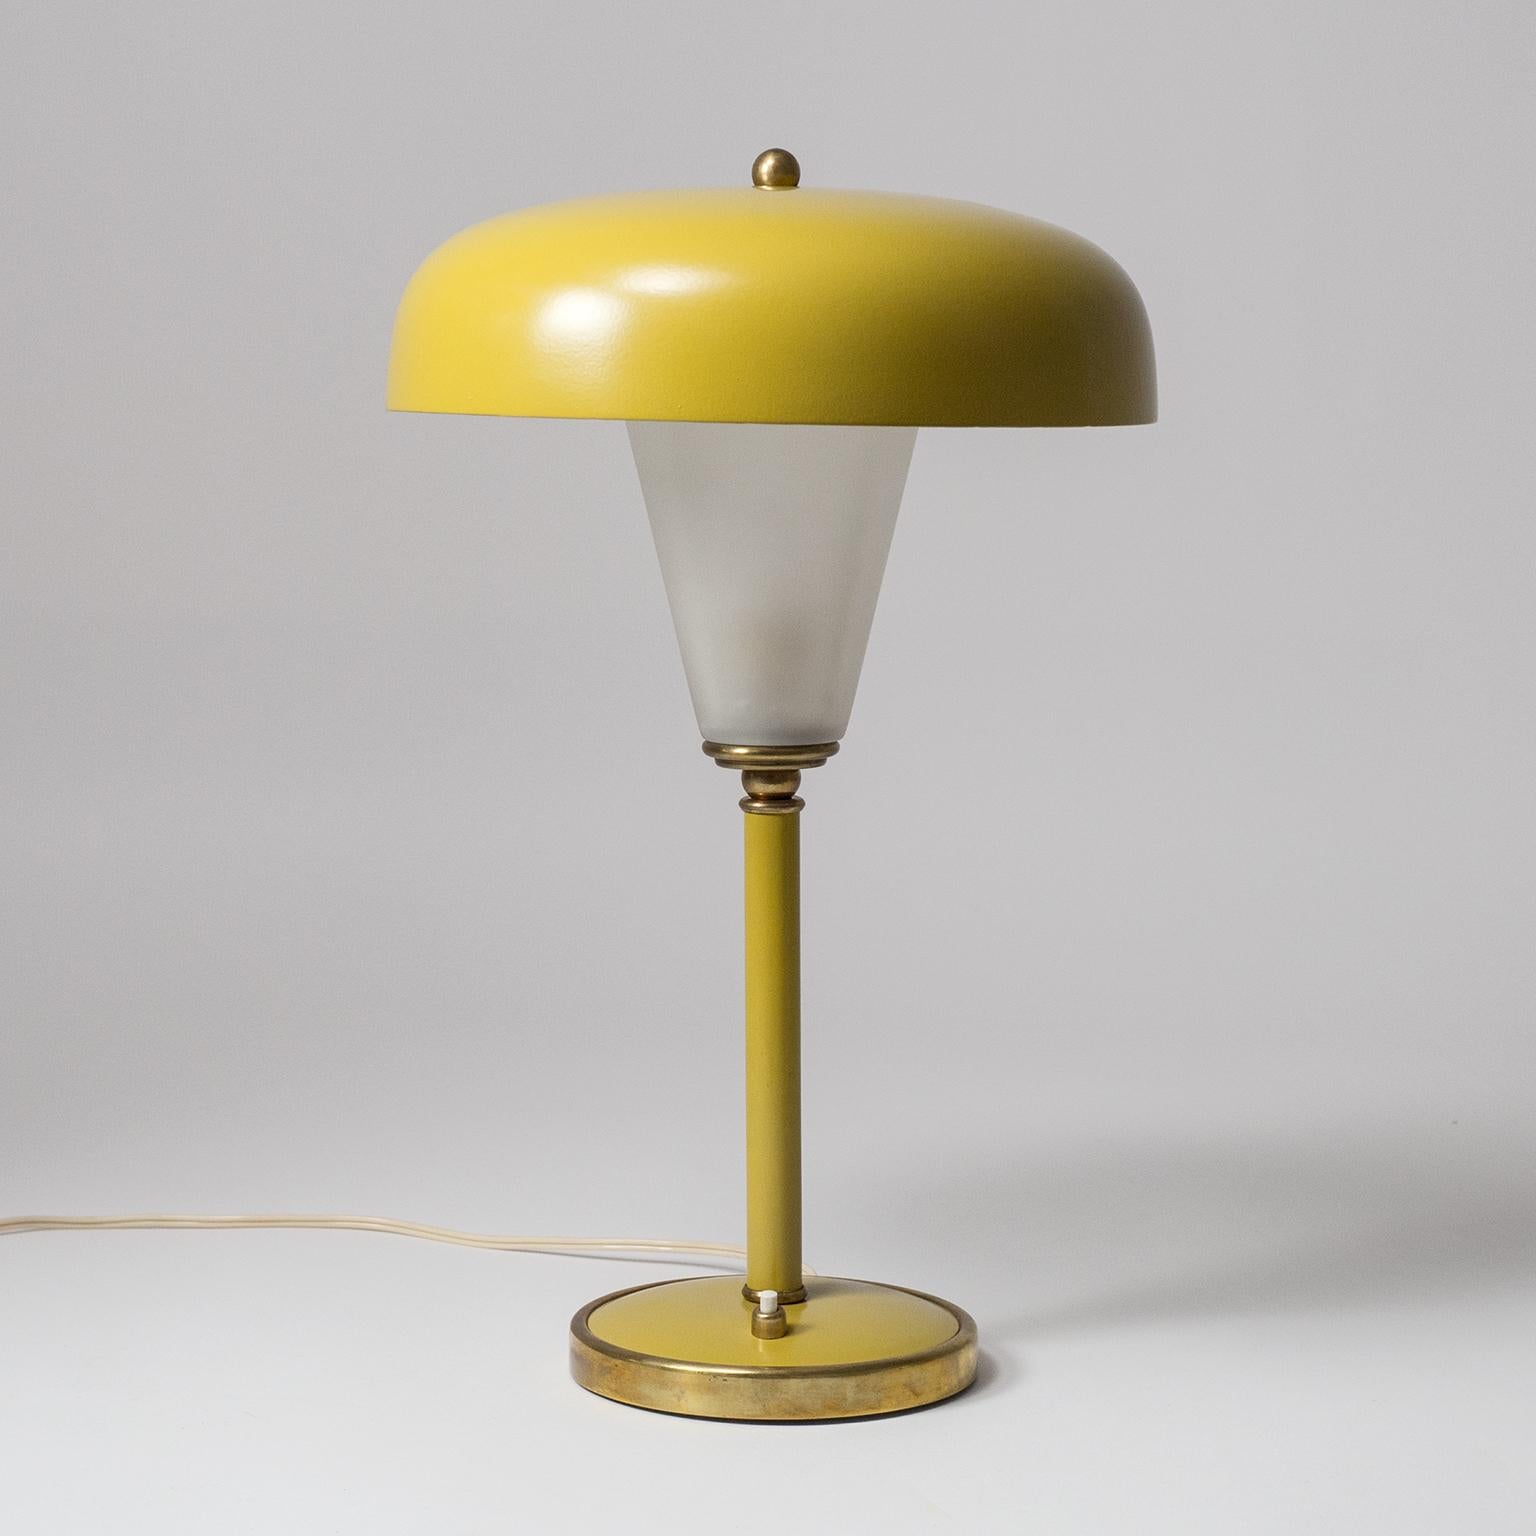 Very chic French table lamp from the 1940s. Design-wise this lantern shaped lamp sits at the crossroad between Art Deco and French modernism sharing trademarks of both styles. Very good original condition with some patina to the brass parts. The